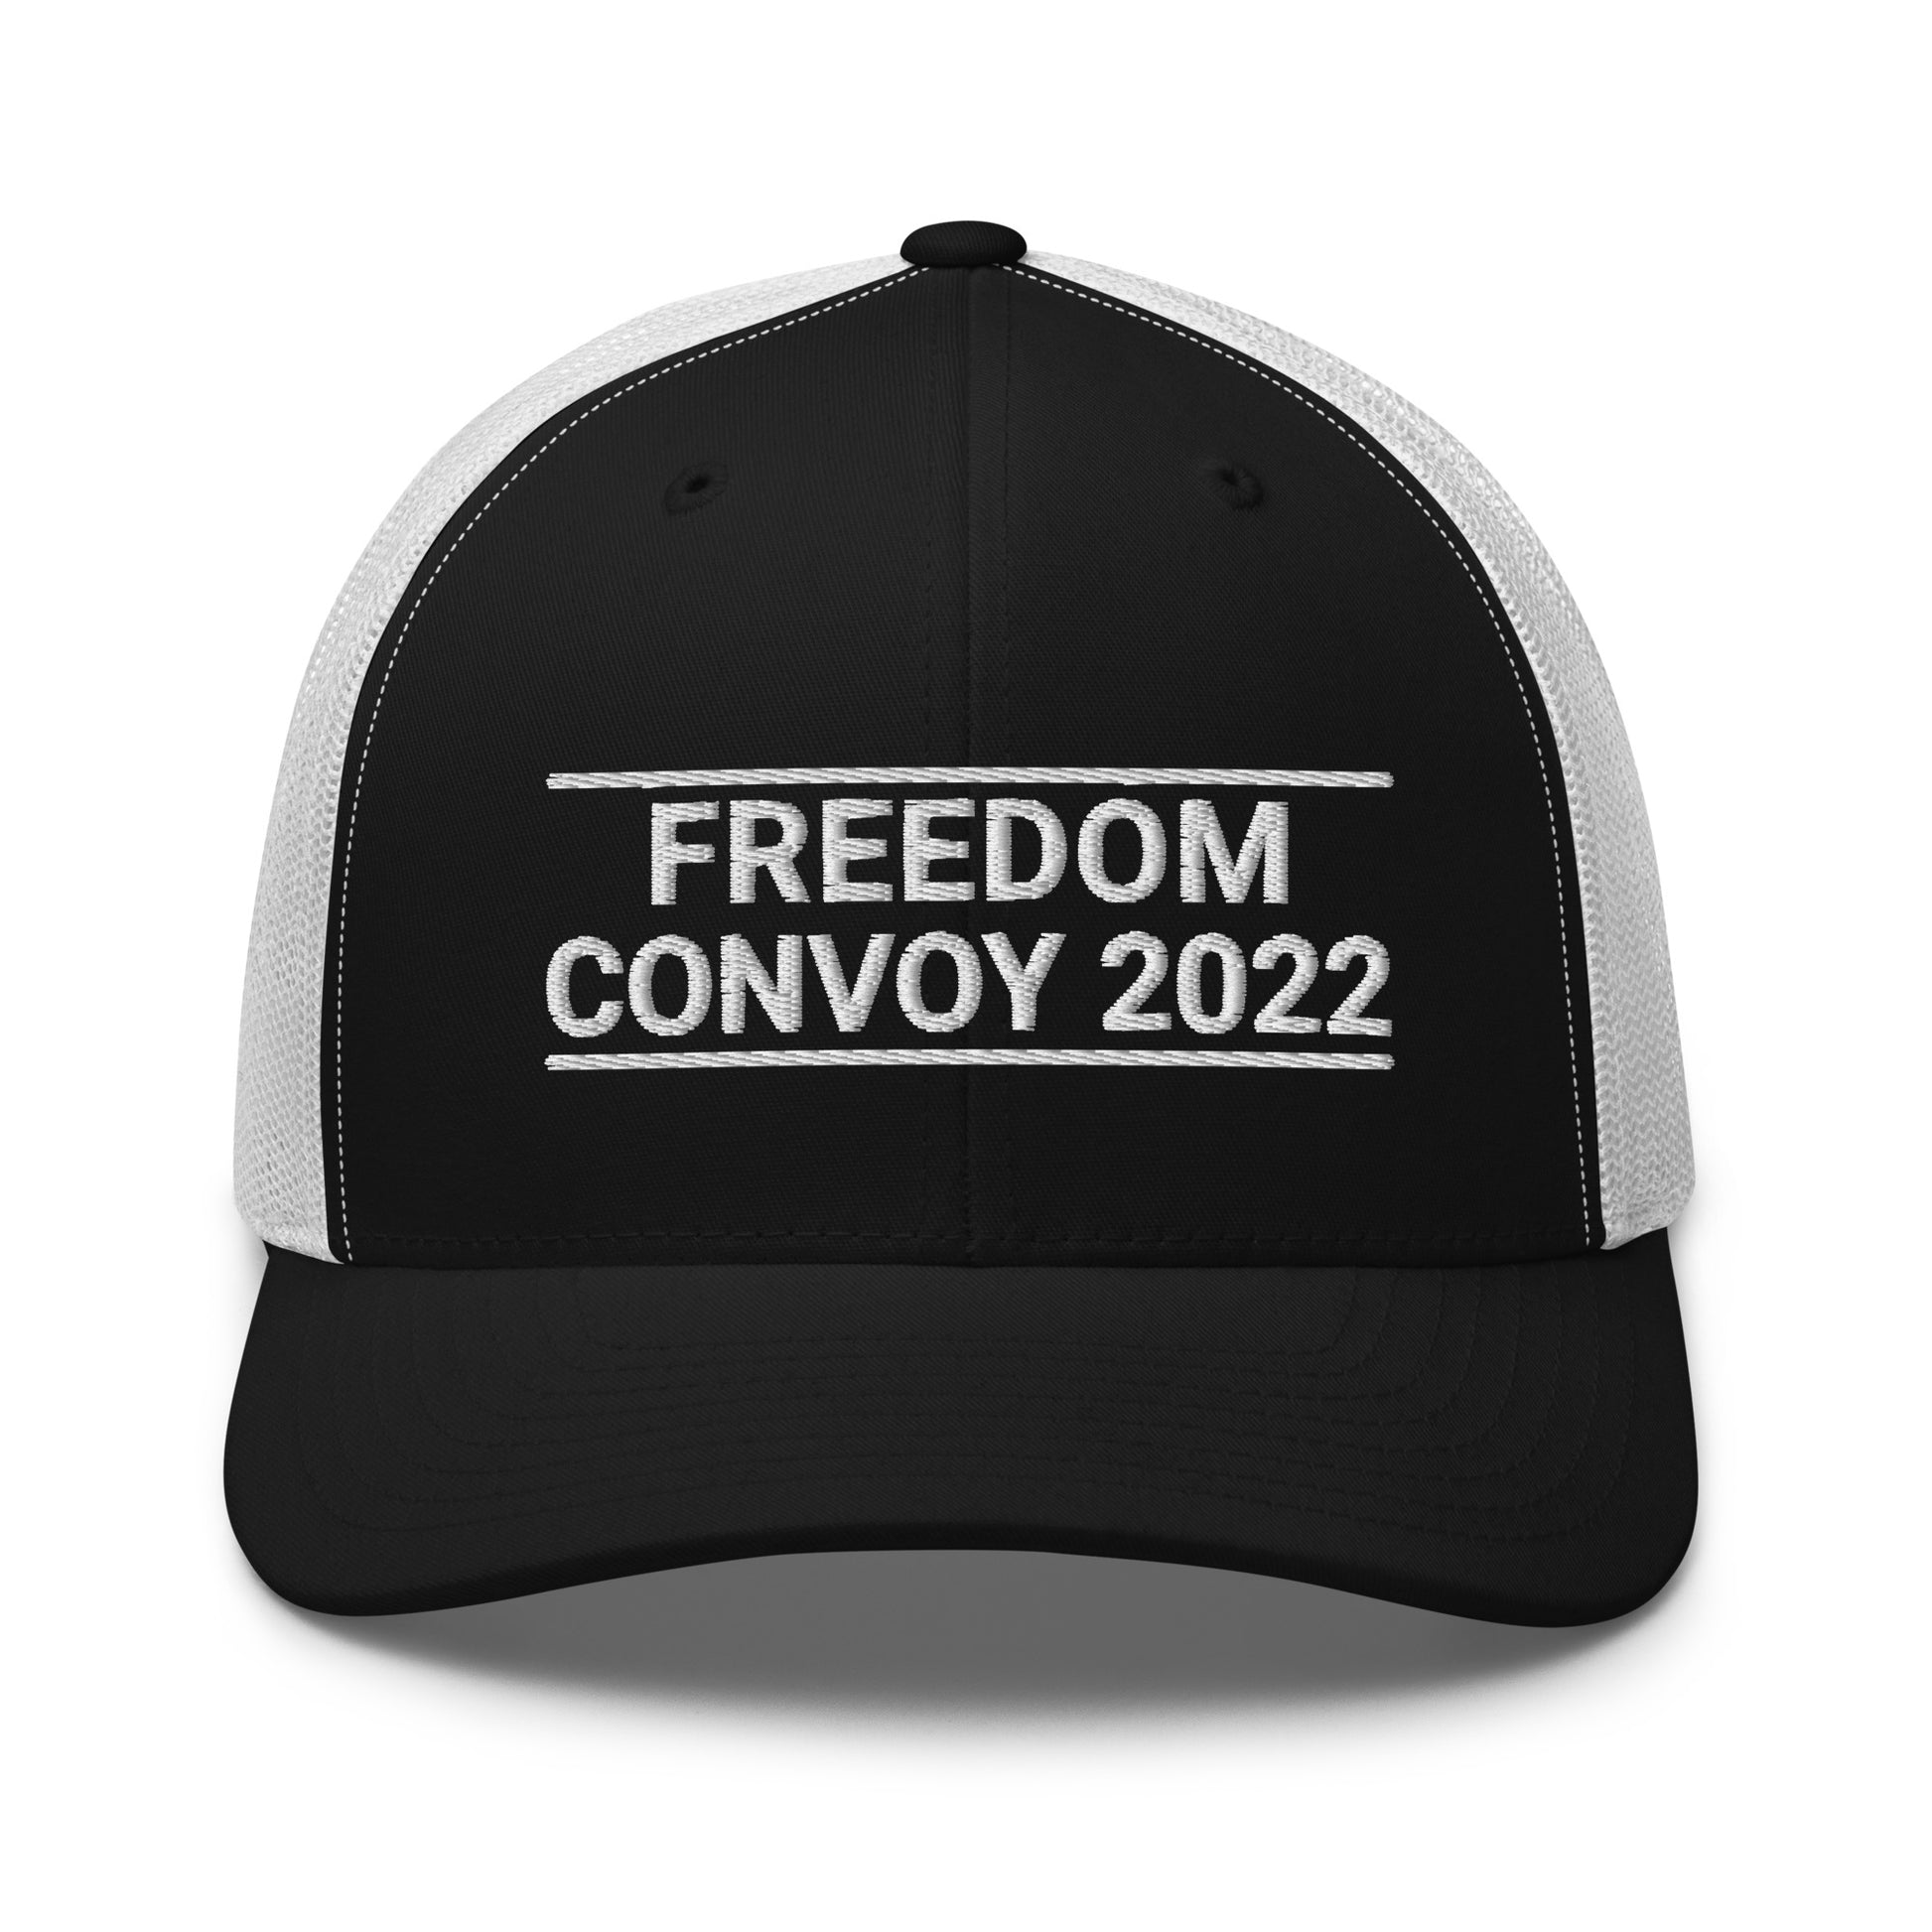 Freedom Convoy 2022 Yupoong 6606 black and white hat.